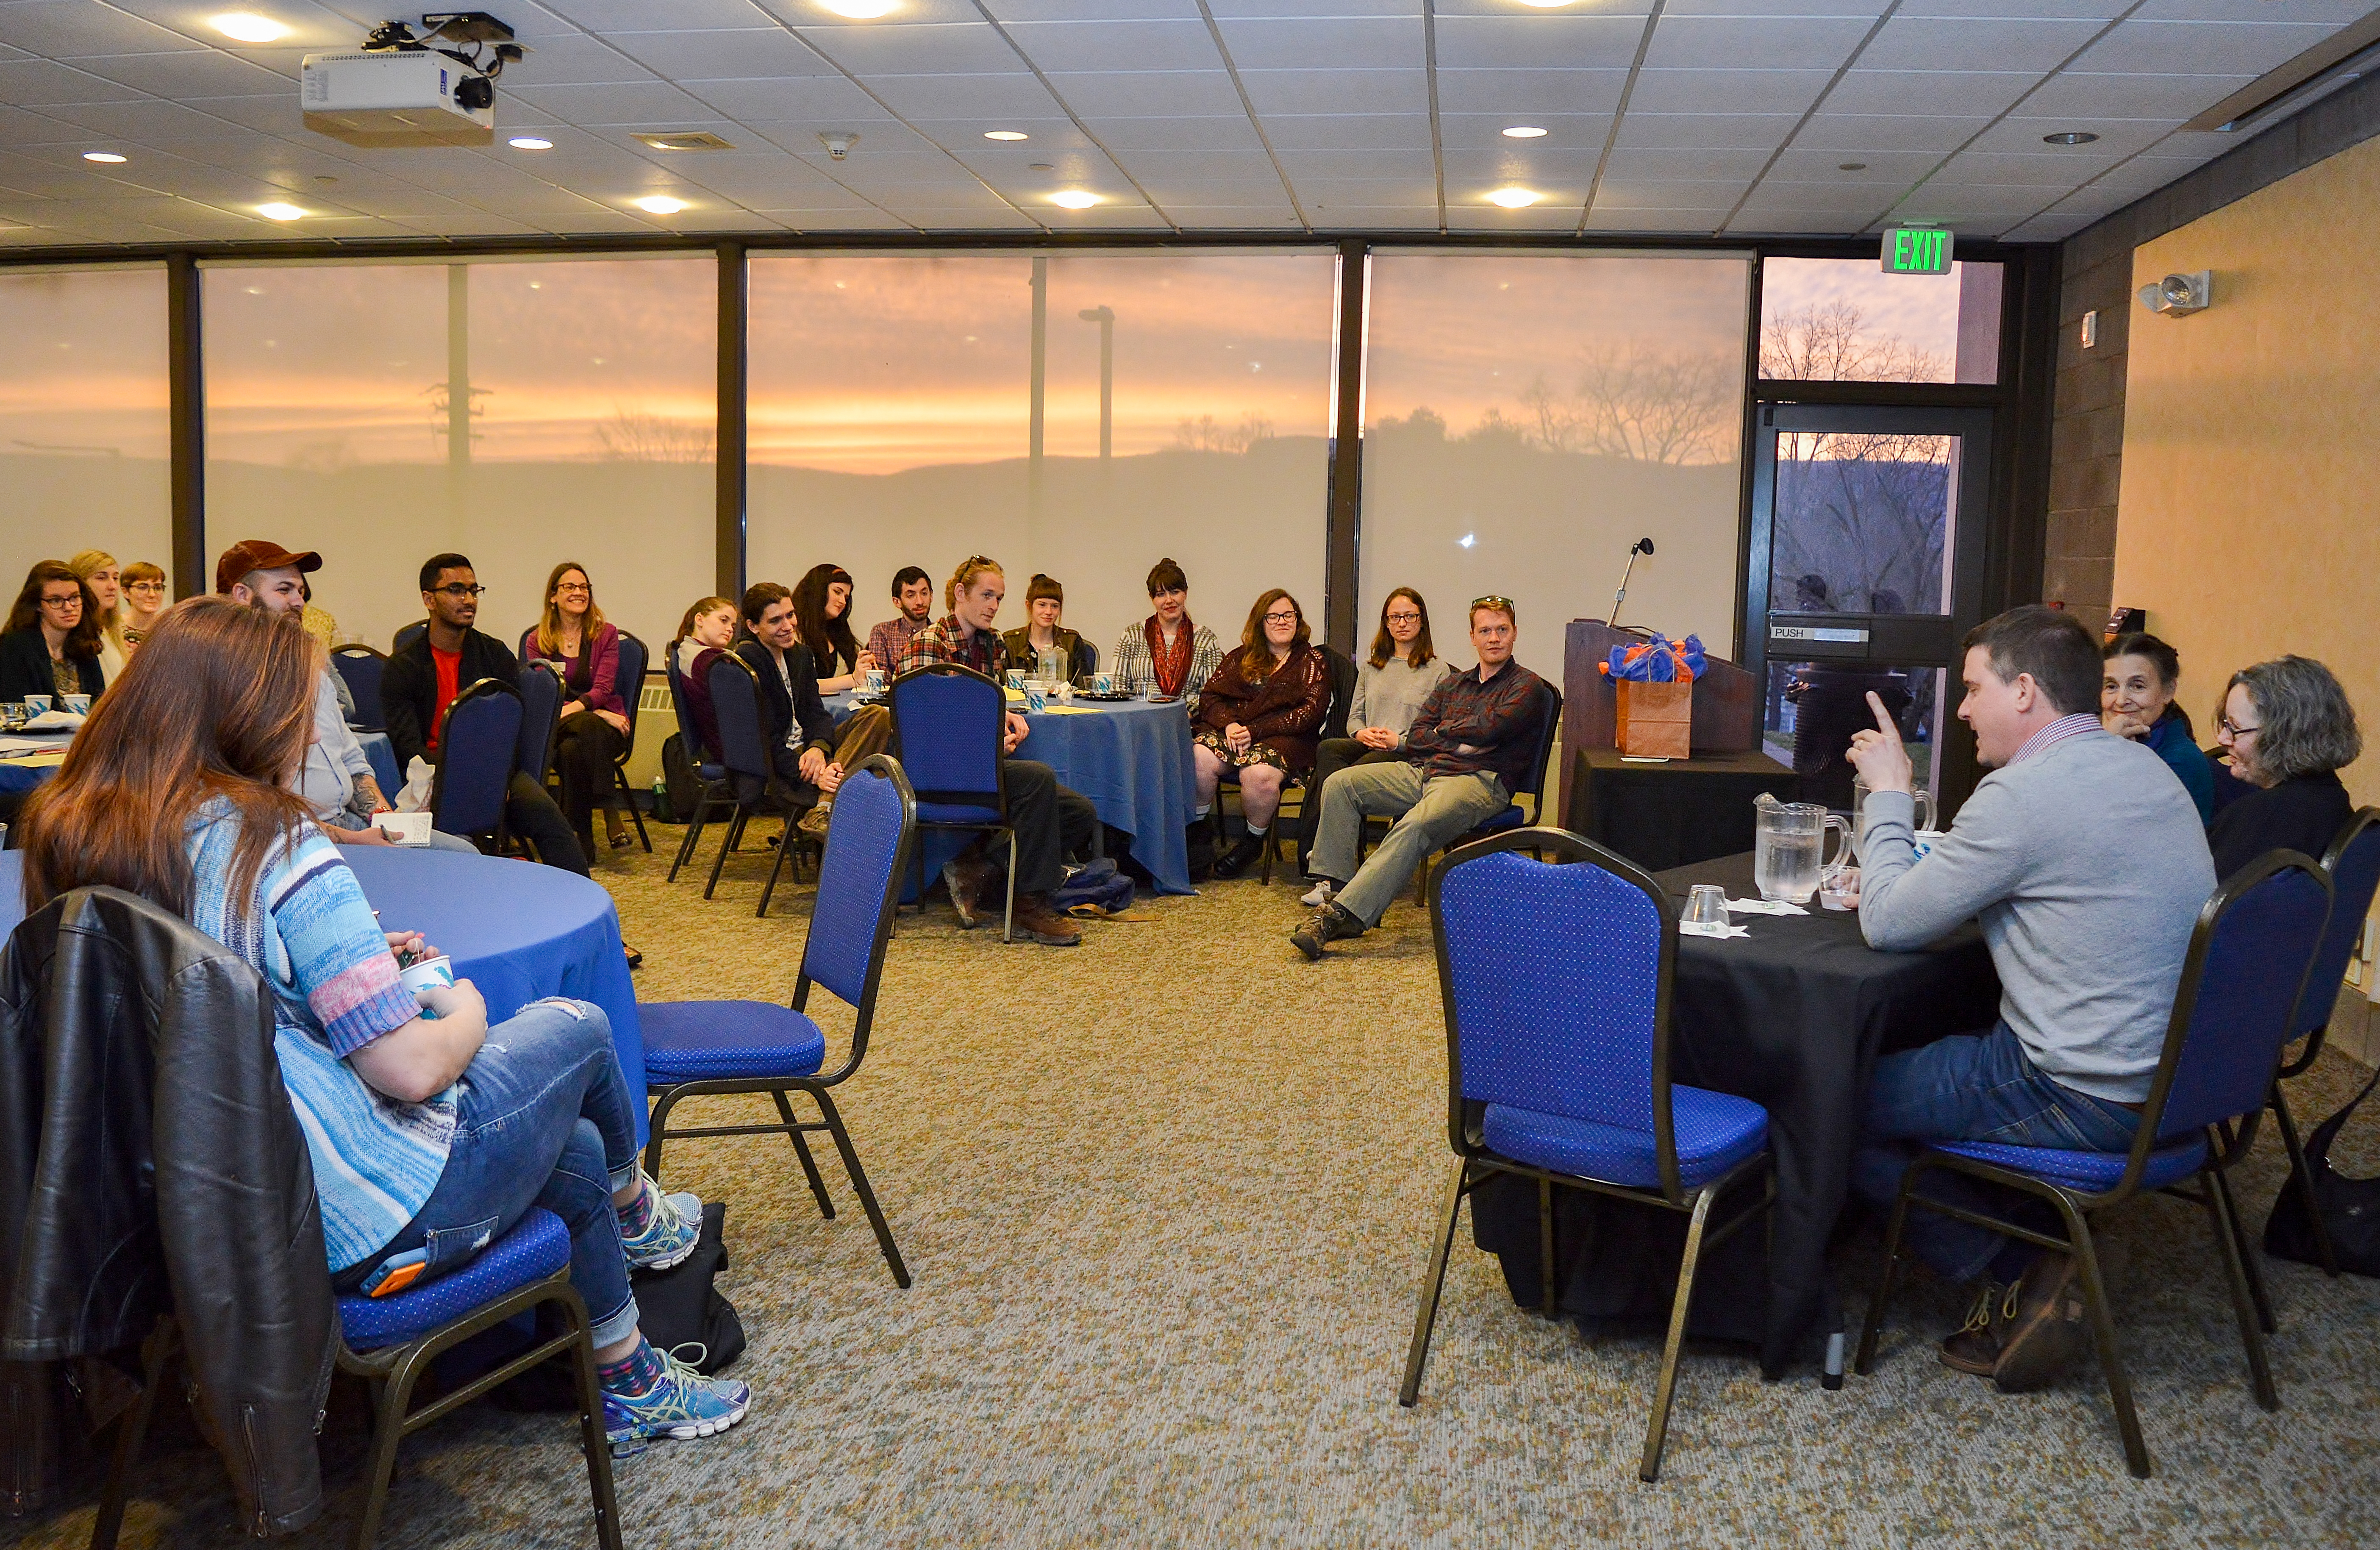 A beautiful sunset is the backdrop for a wonder evening discussion by alumni about career paths for art history majors